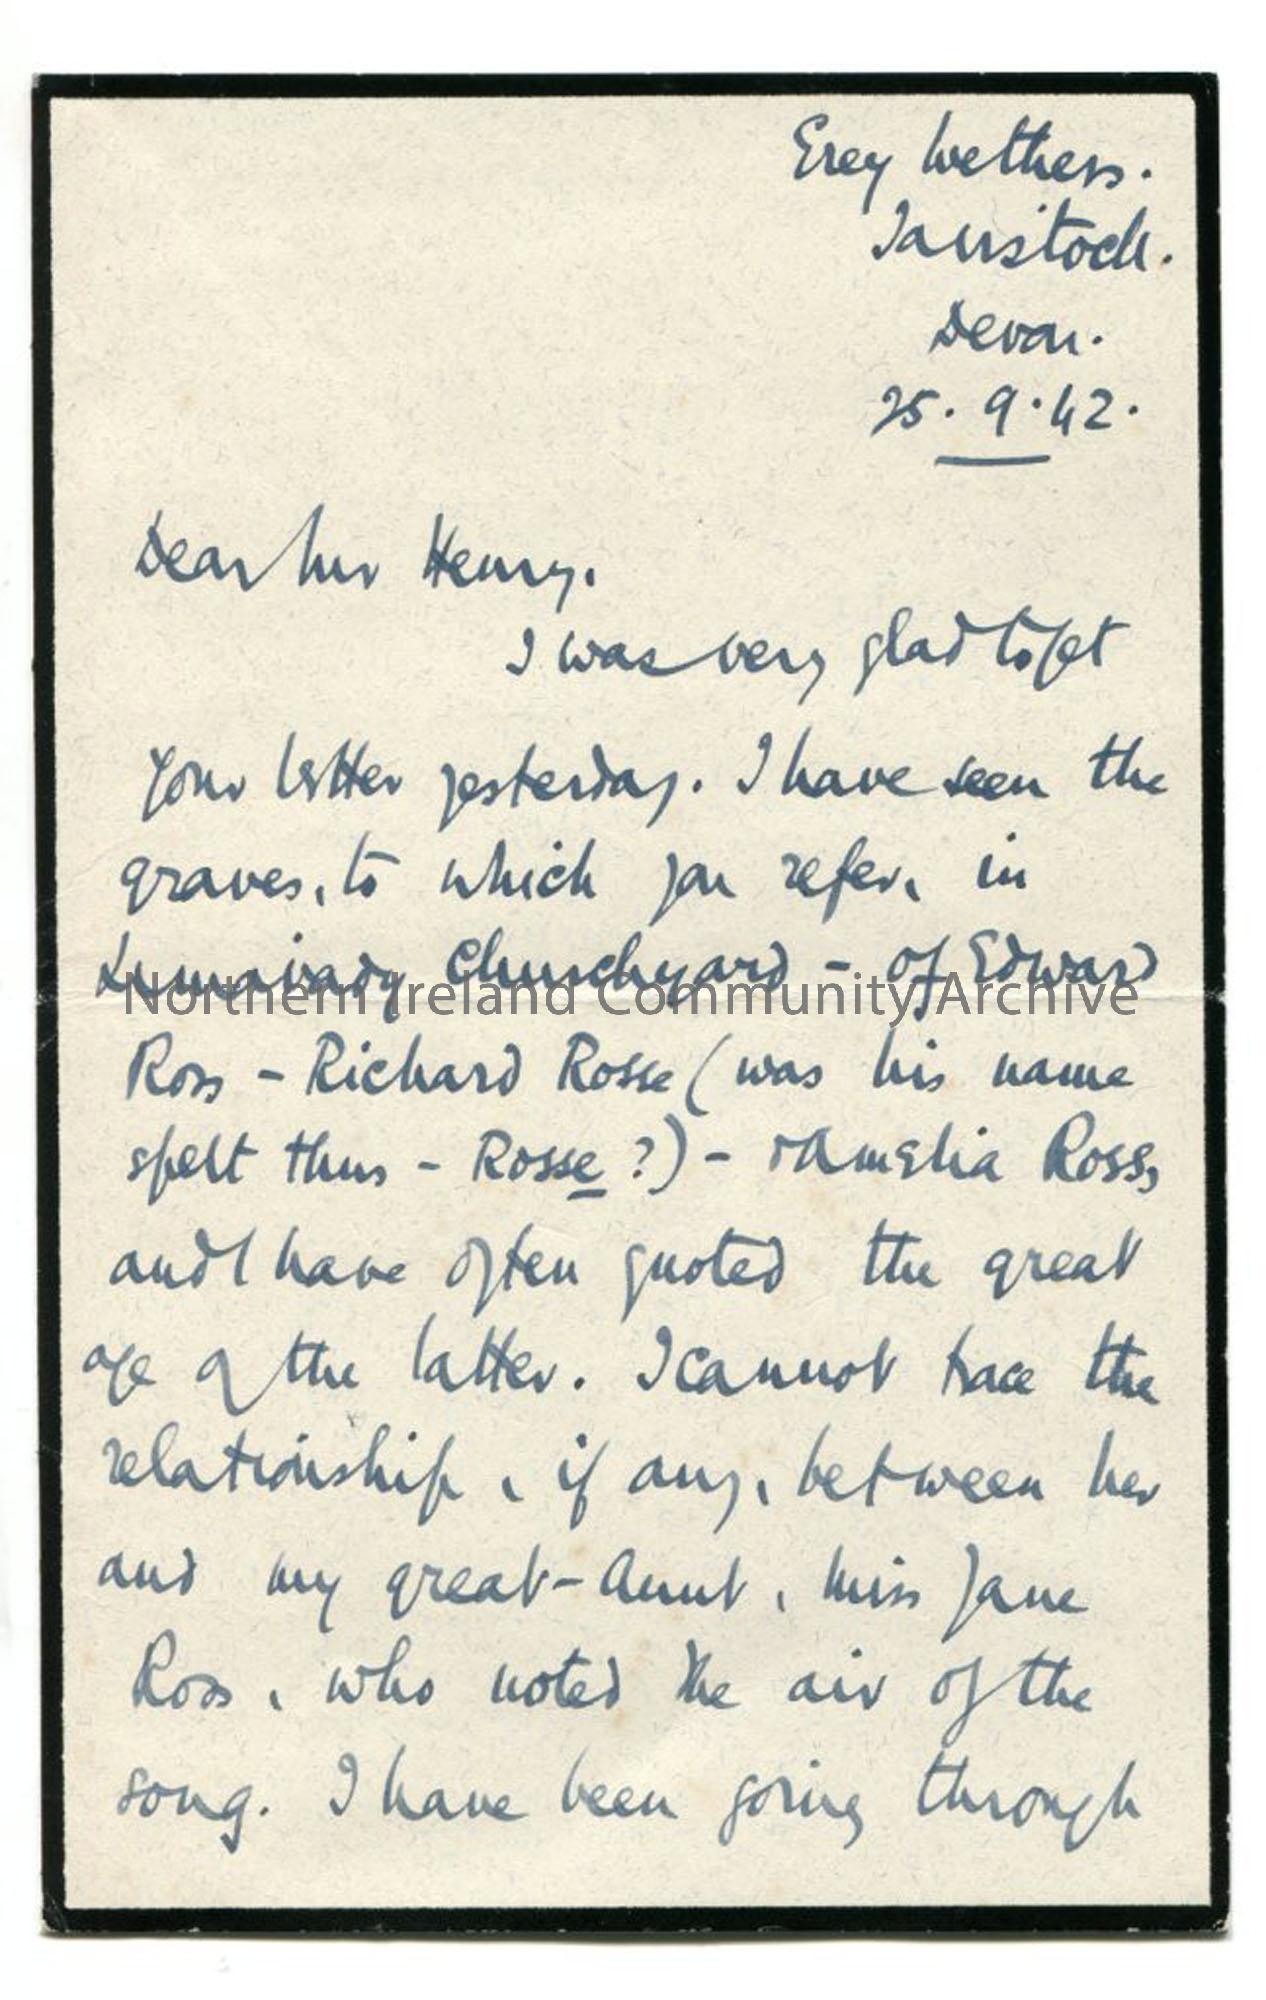 Page one of letter from Rev Trelawney-Ross, 25.9.1942